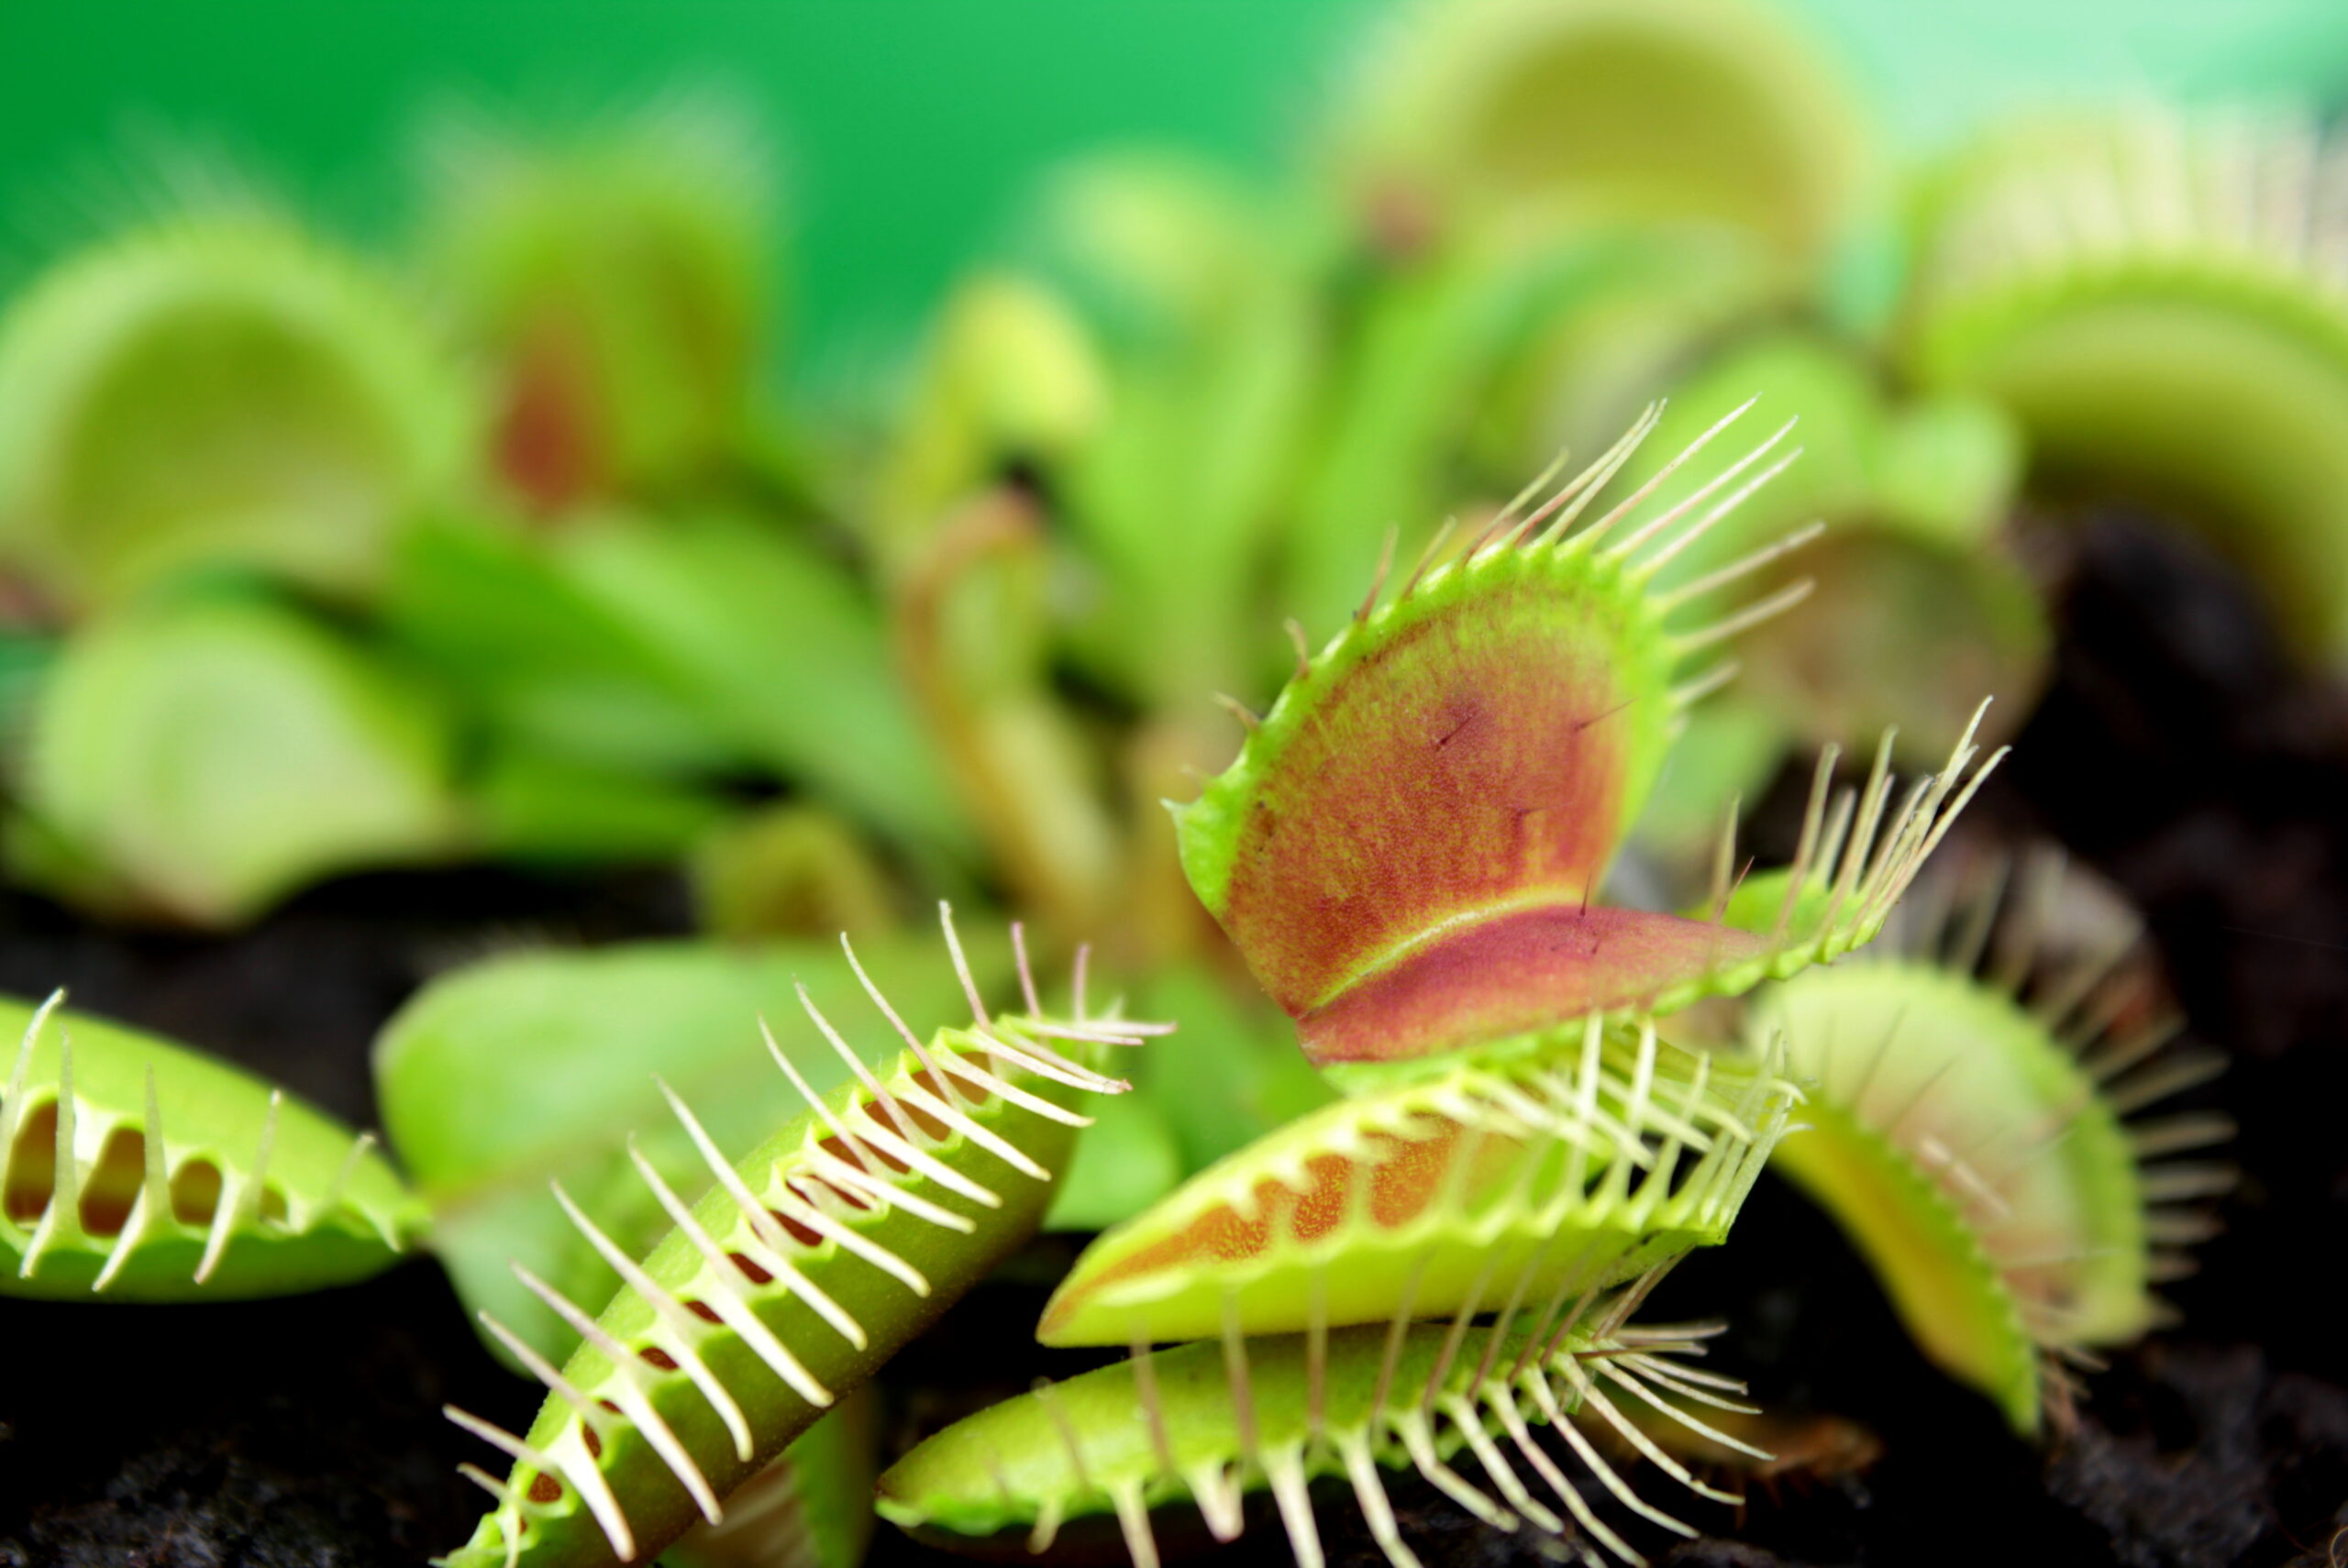 Venus flytraps know not to eat the insects that pollinate them